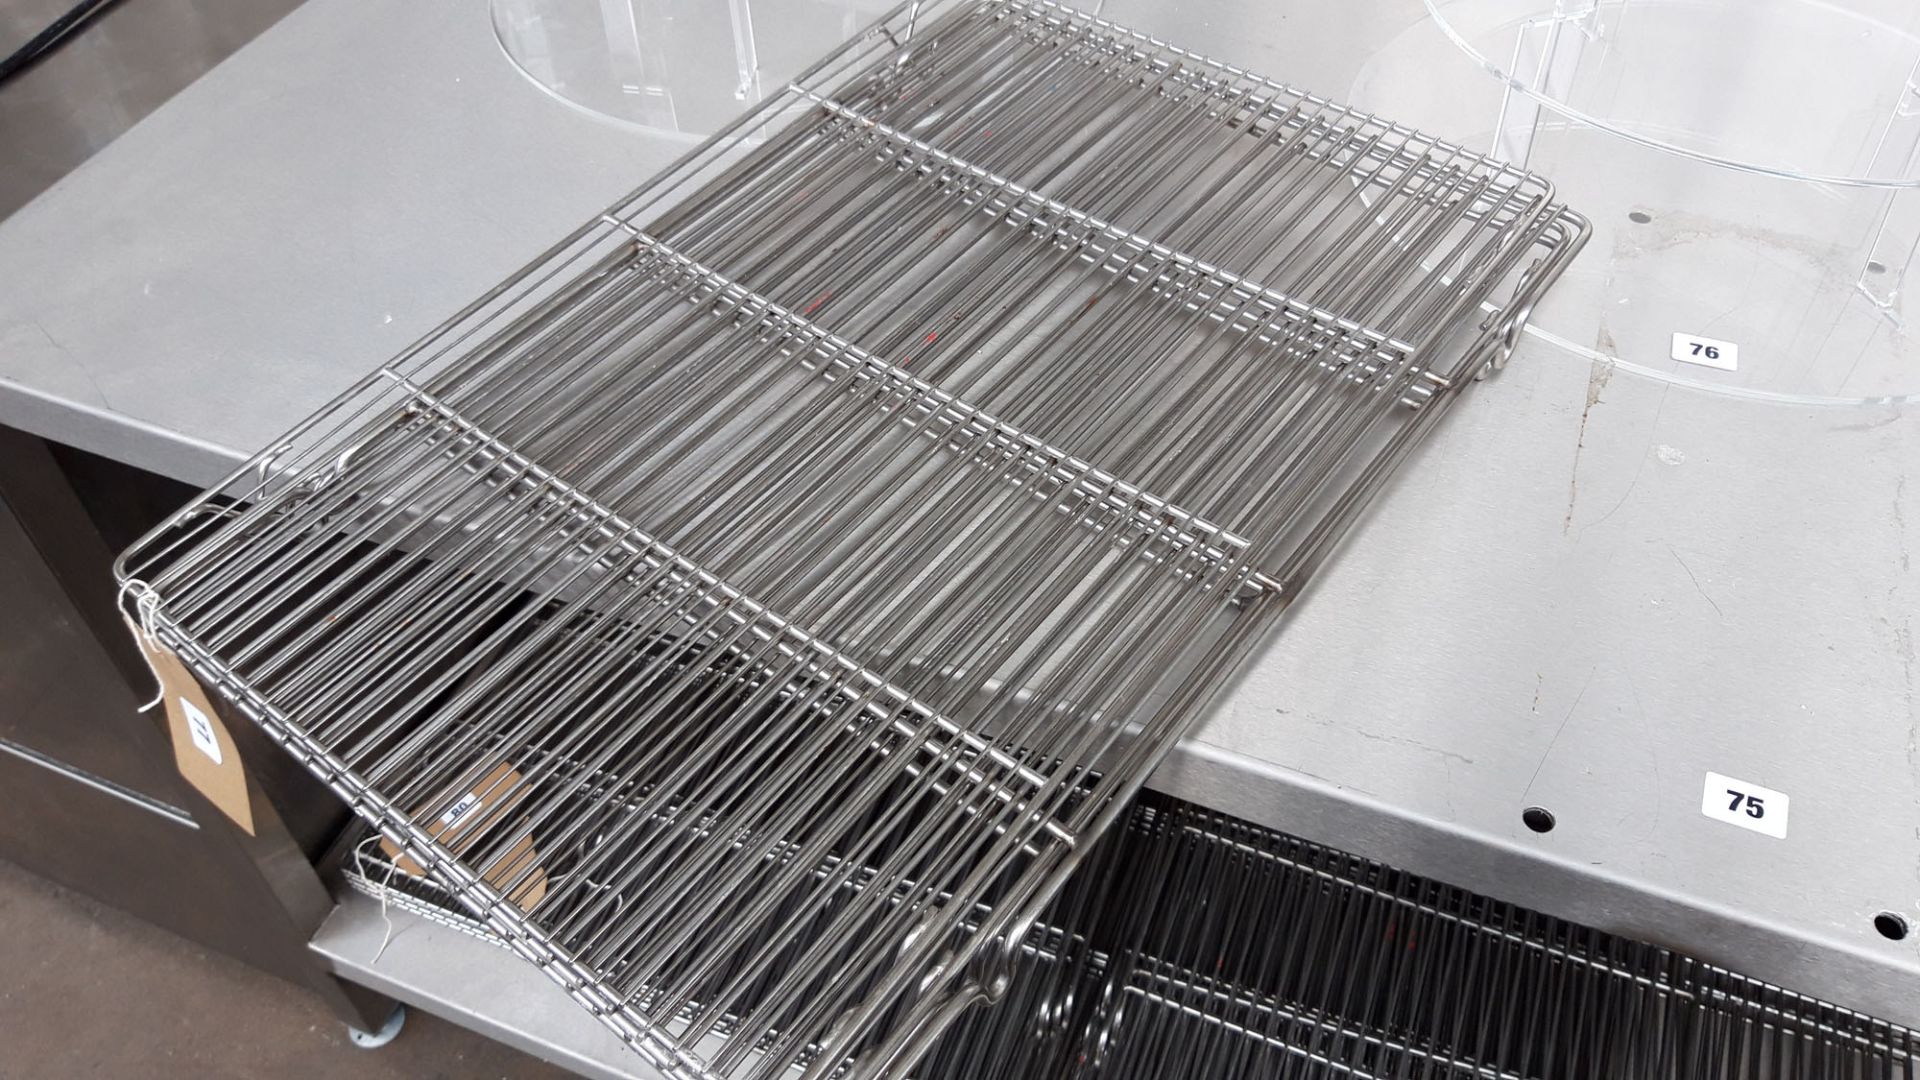 4 stainless steel oven trays